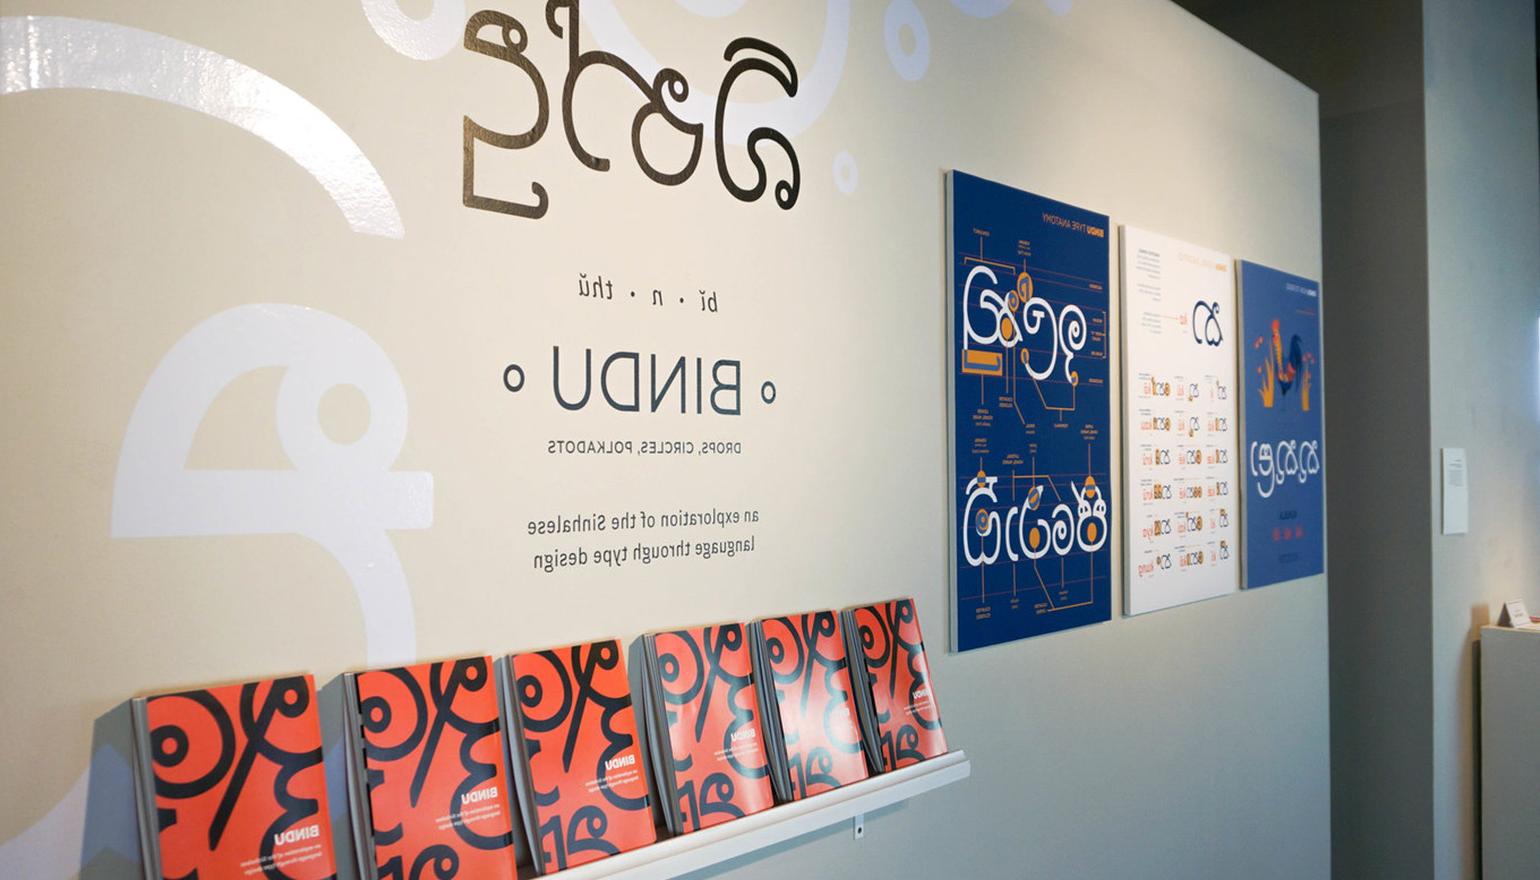 Gallery typographic project on display